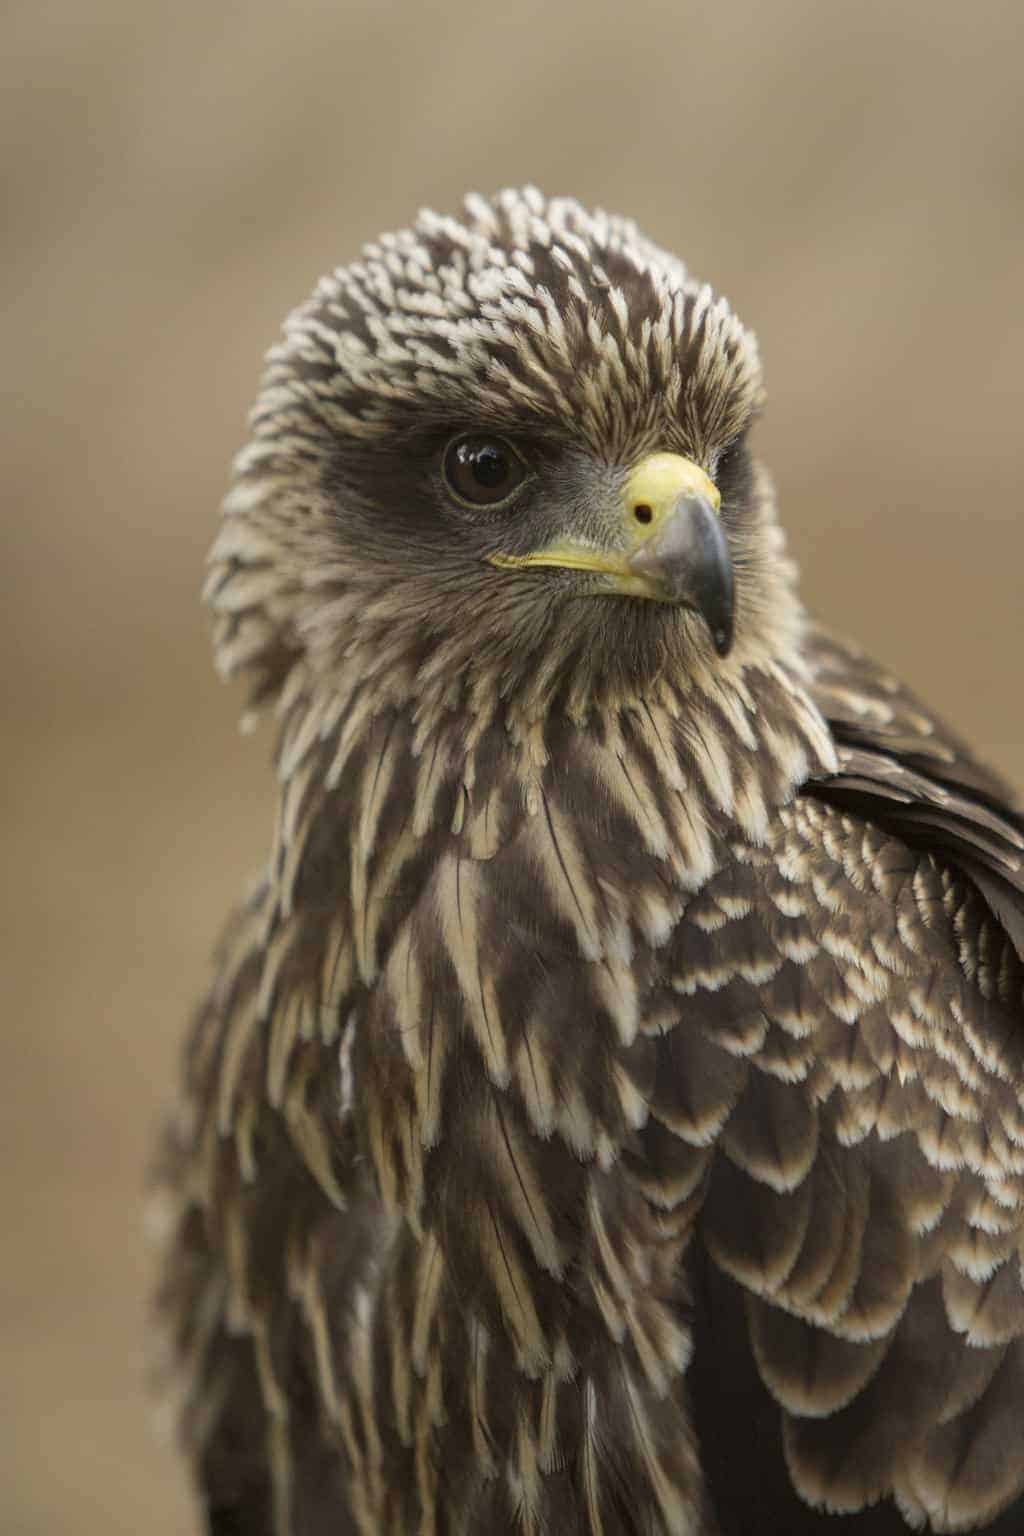 Yellow Billed Kite at the National Centre for Birds of Prey, Duncombe Park, Helmsley UK